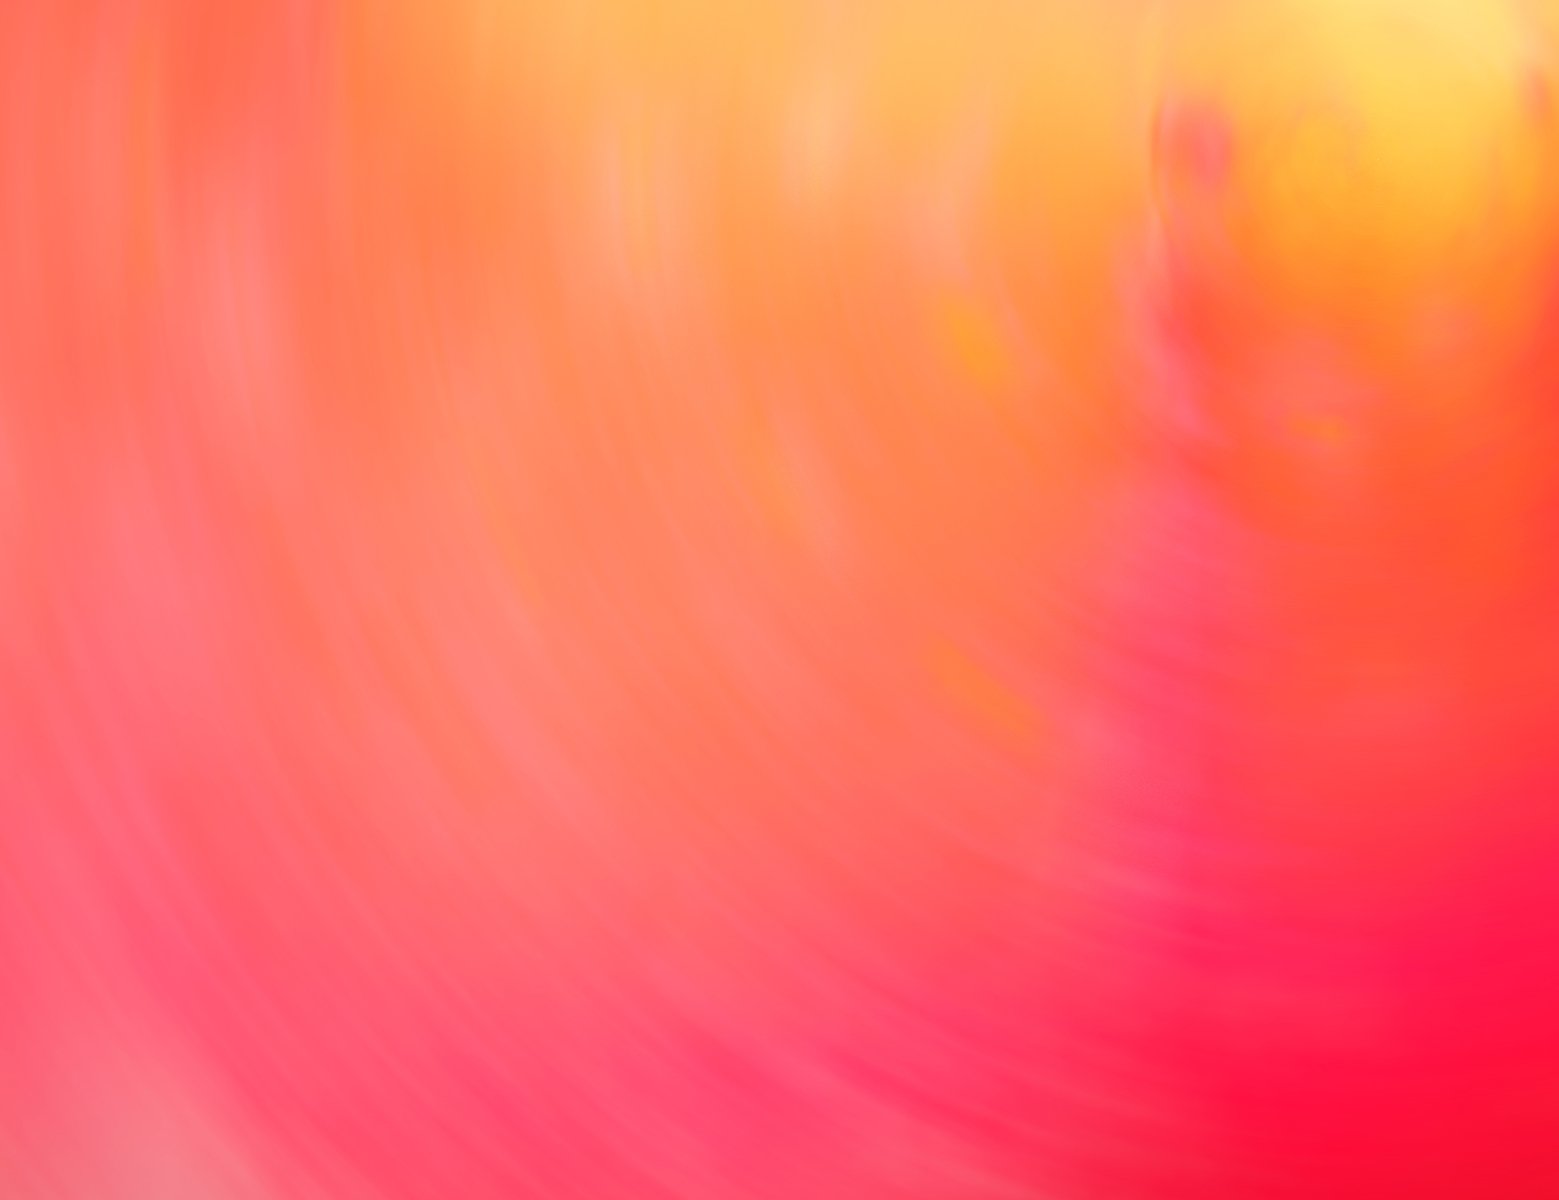 an image of a blurred orange in the middle of a colorful background